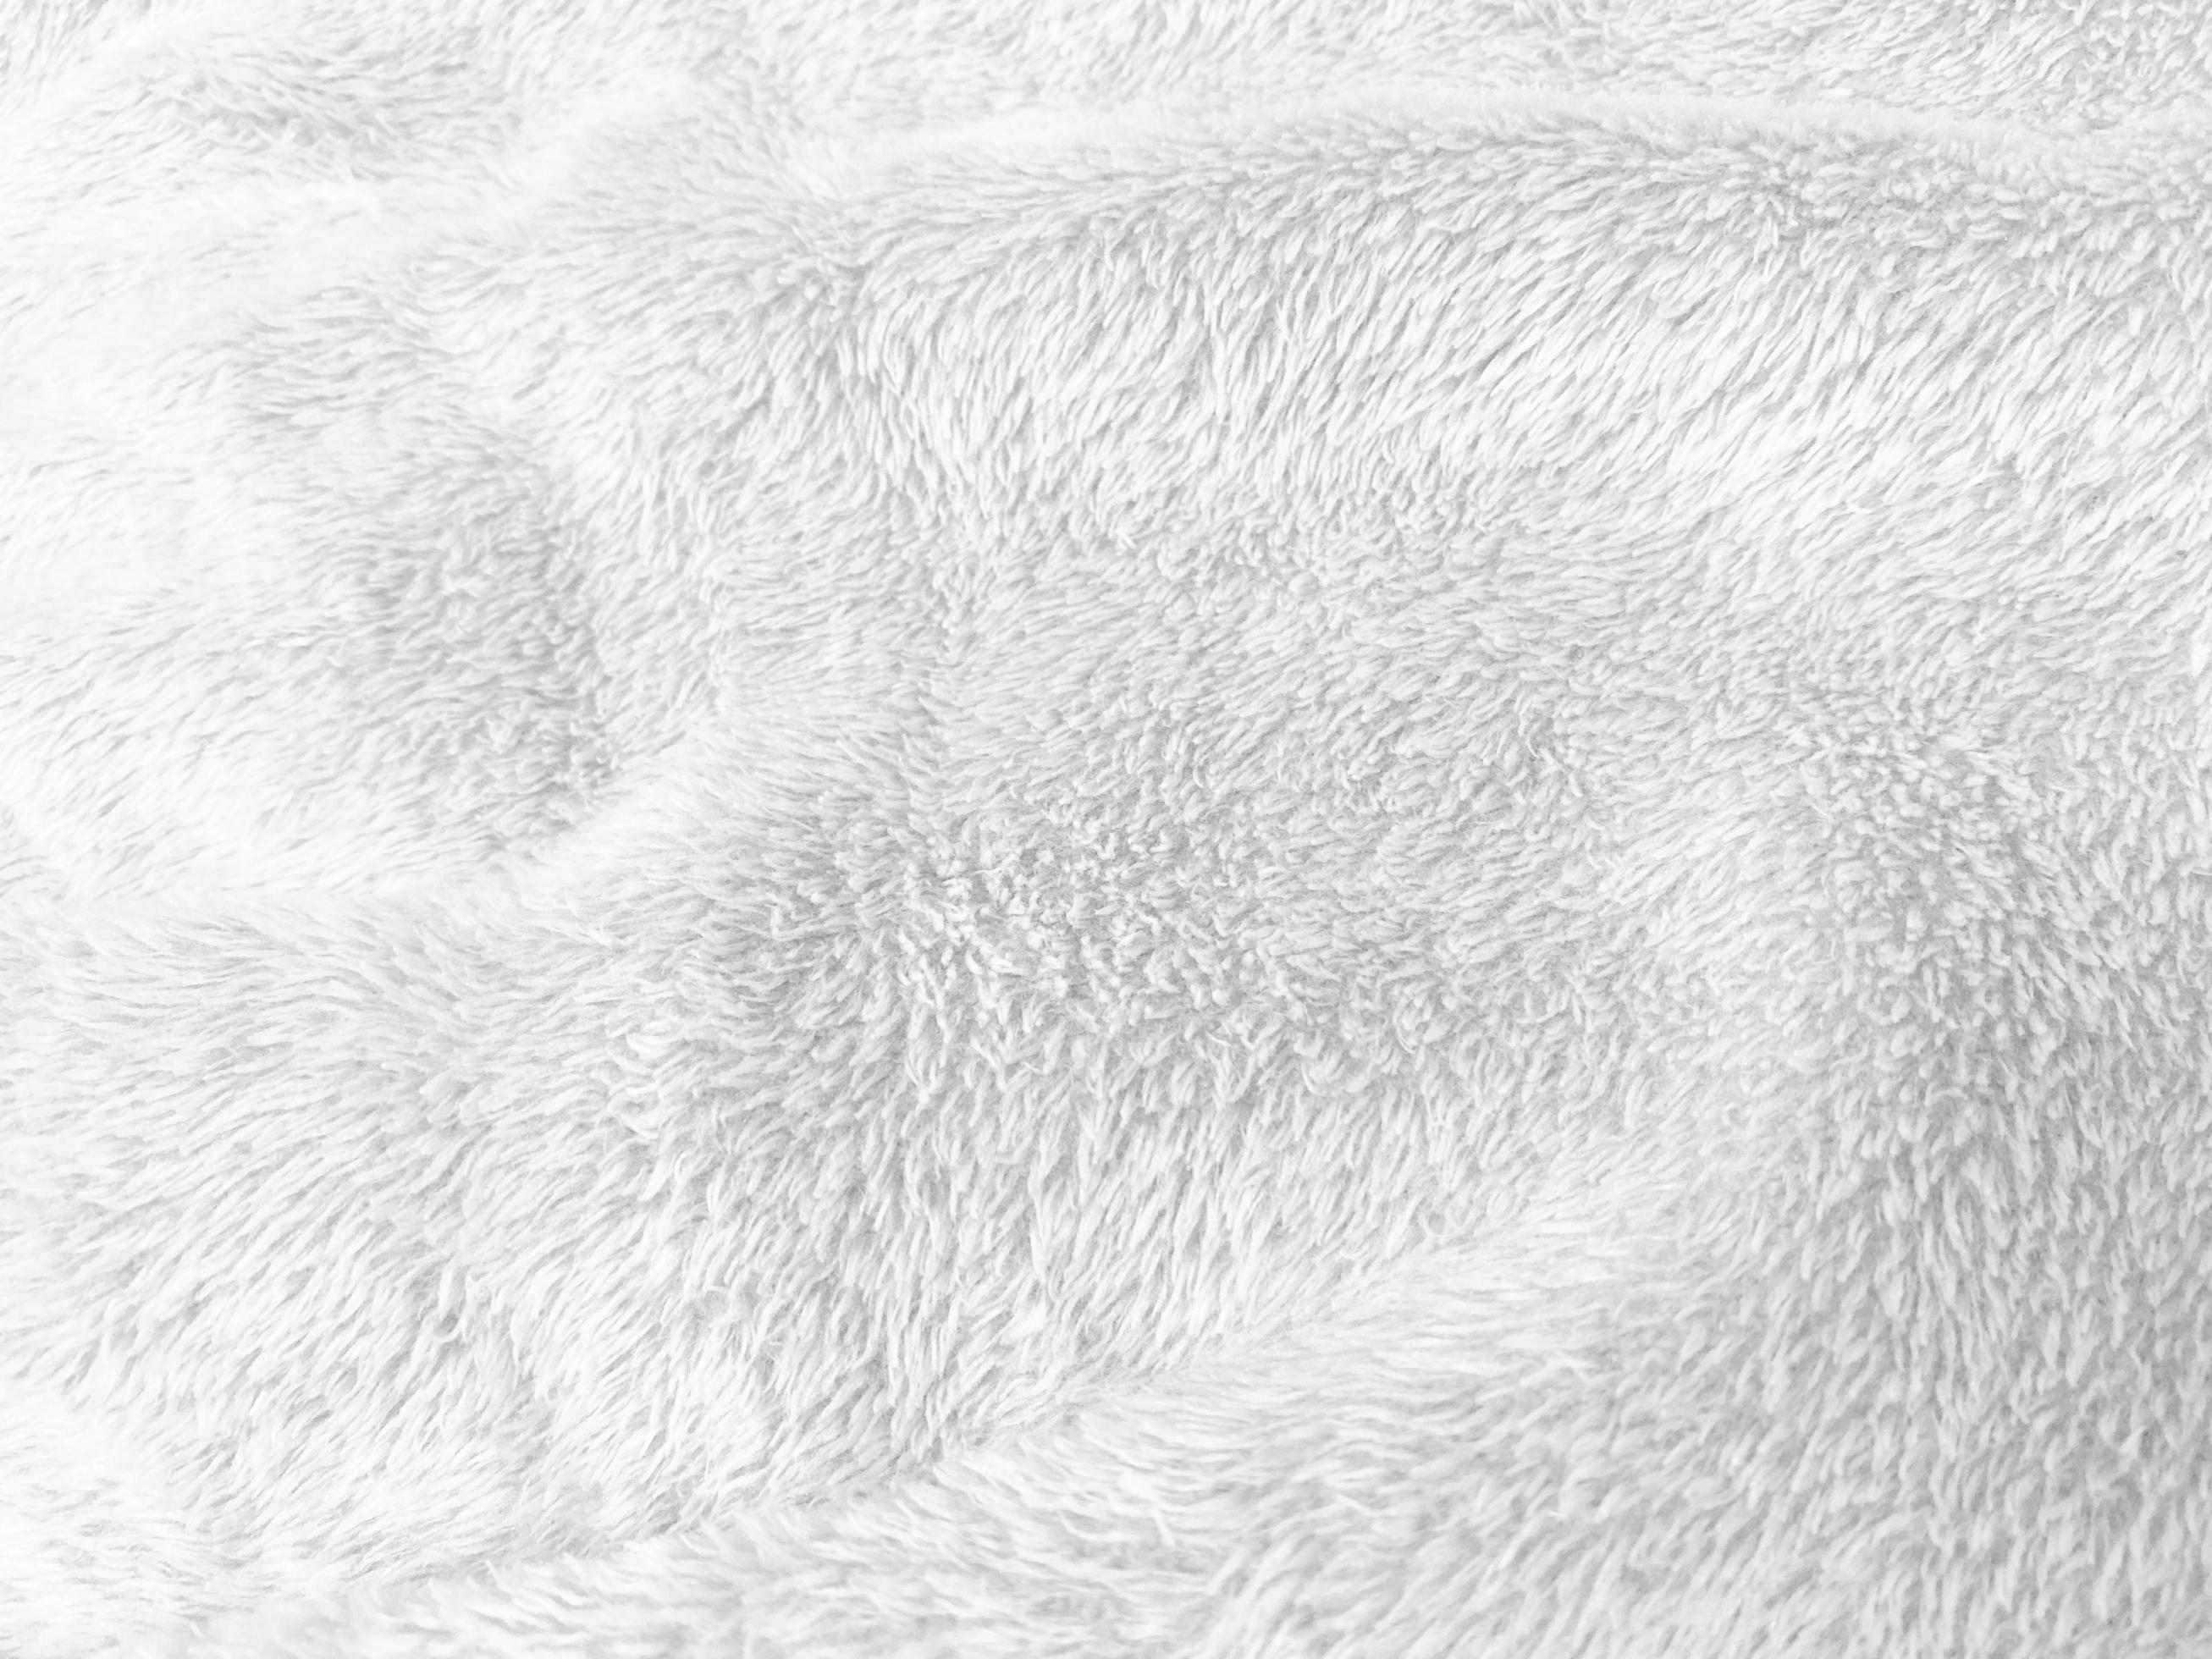 Fur Texture Light Natural White Fabric Background Flawlessly Clean